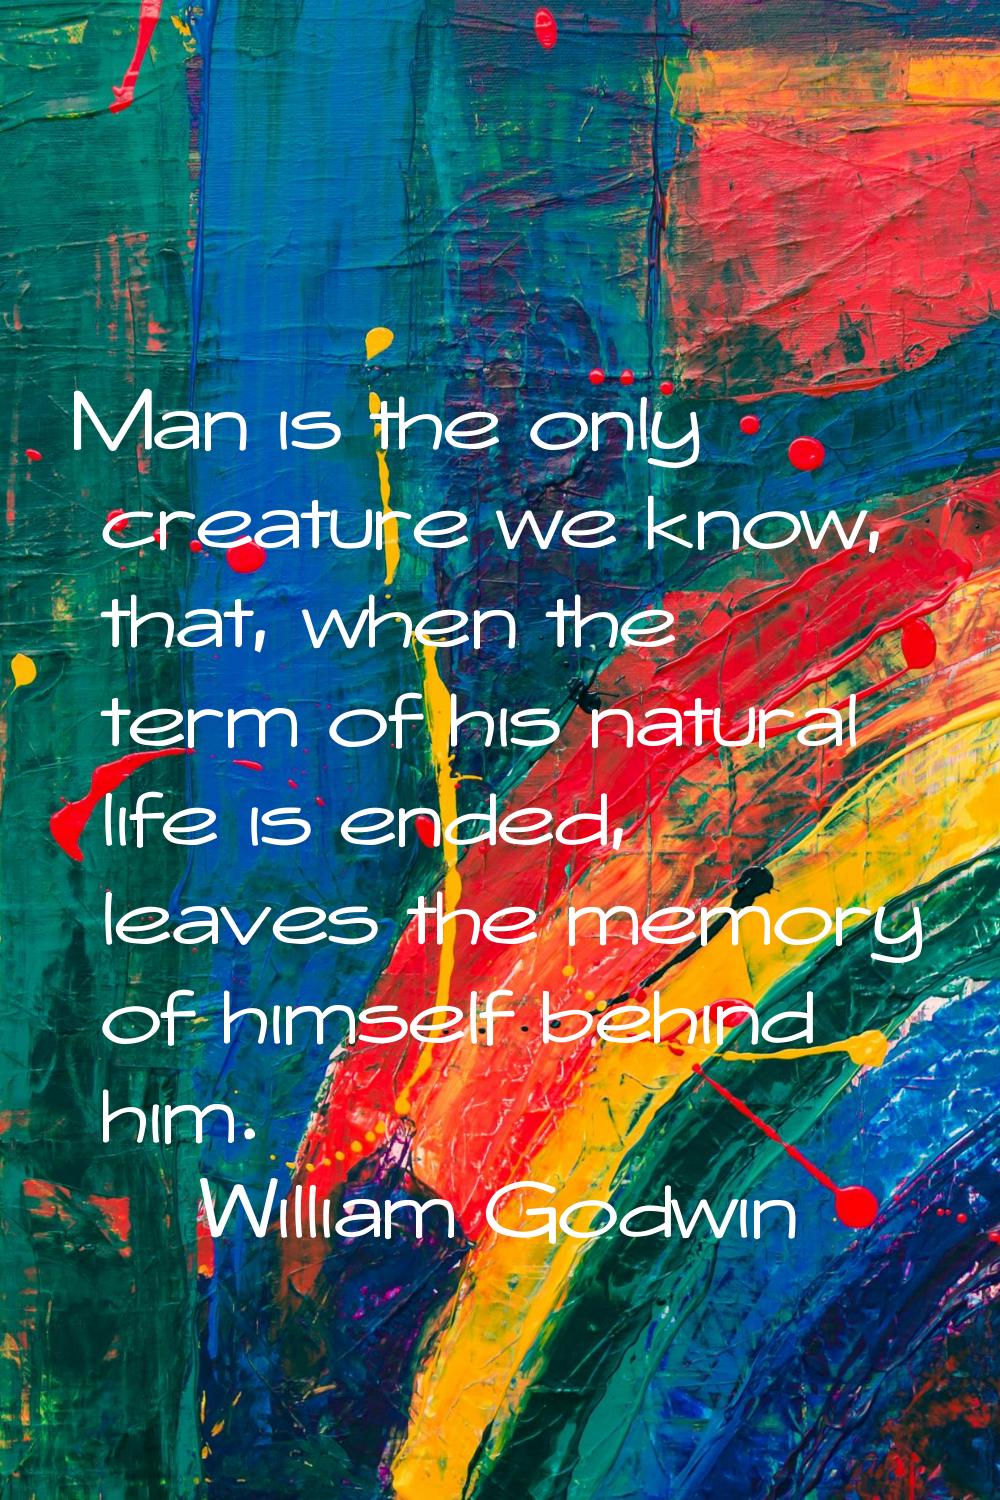 Man is the only creature we know, that, when the term of his natural life is ended, leaves the memo